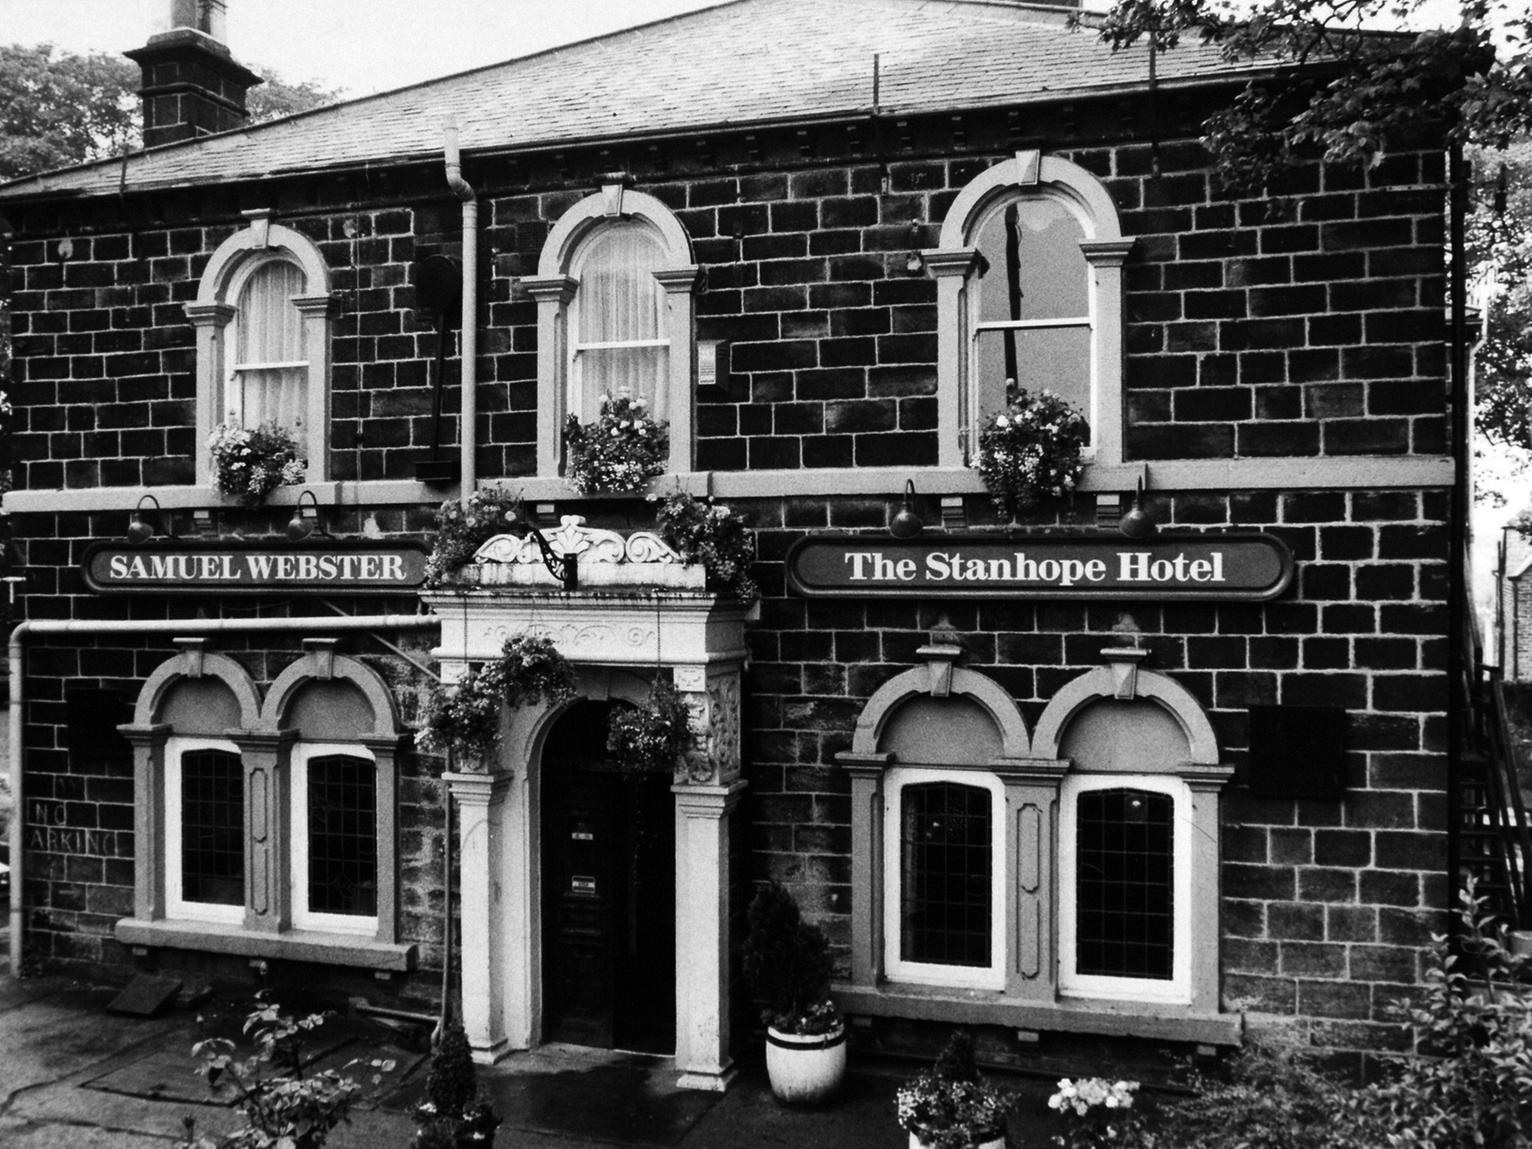 The Stanhope Hotel on Calverley Lane in Rodley.